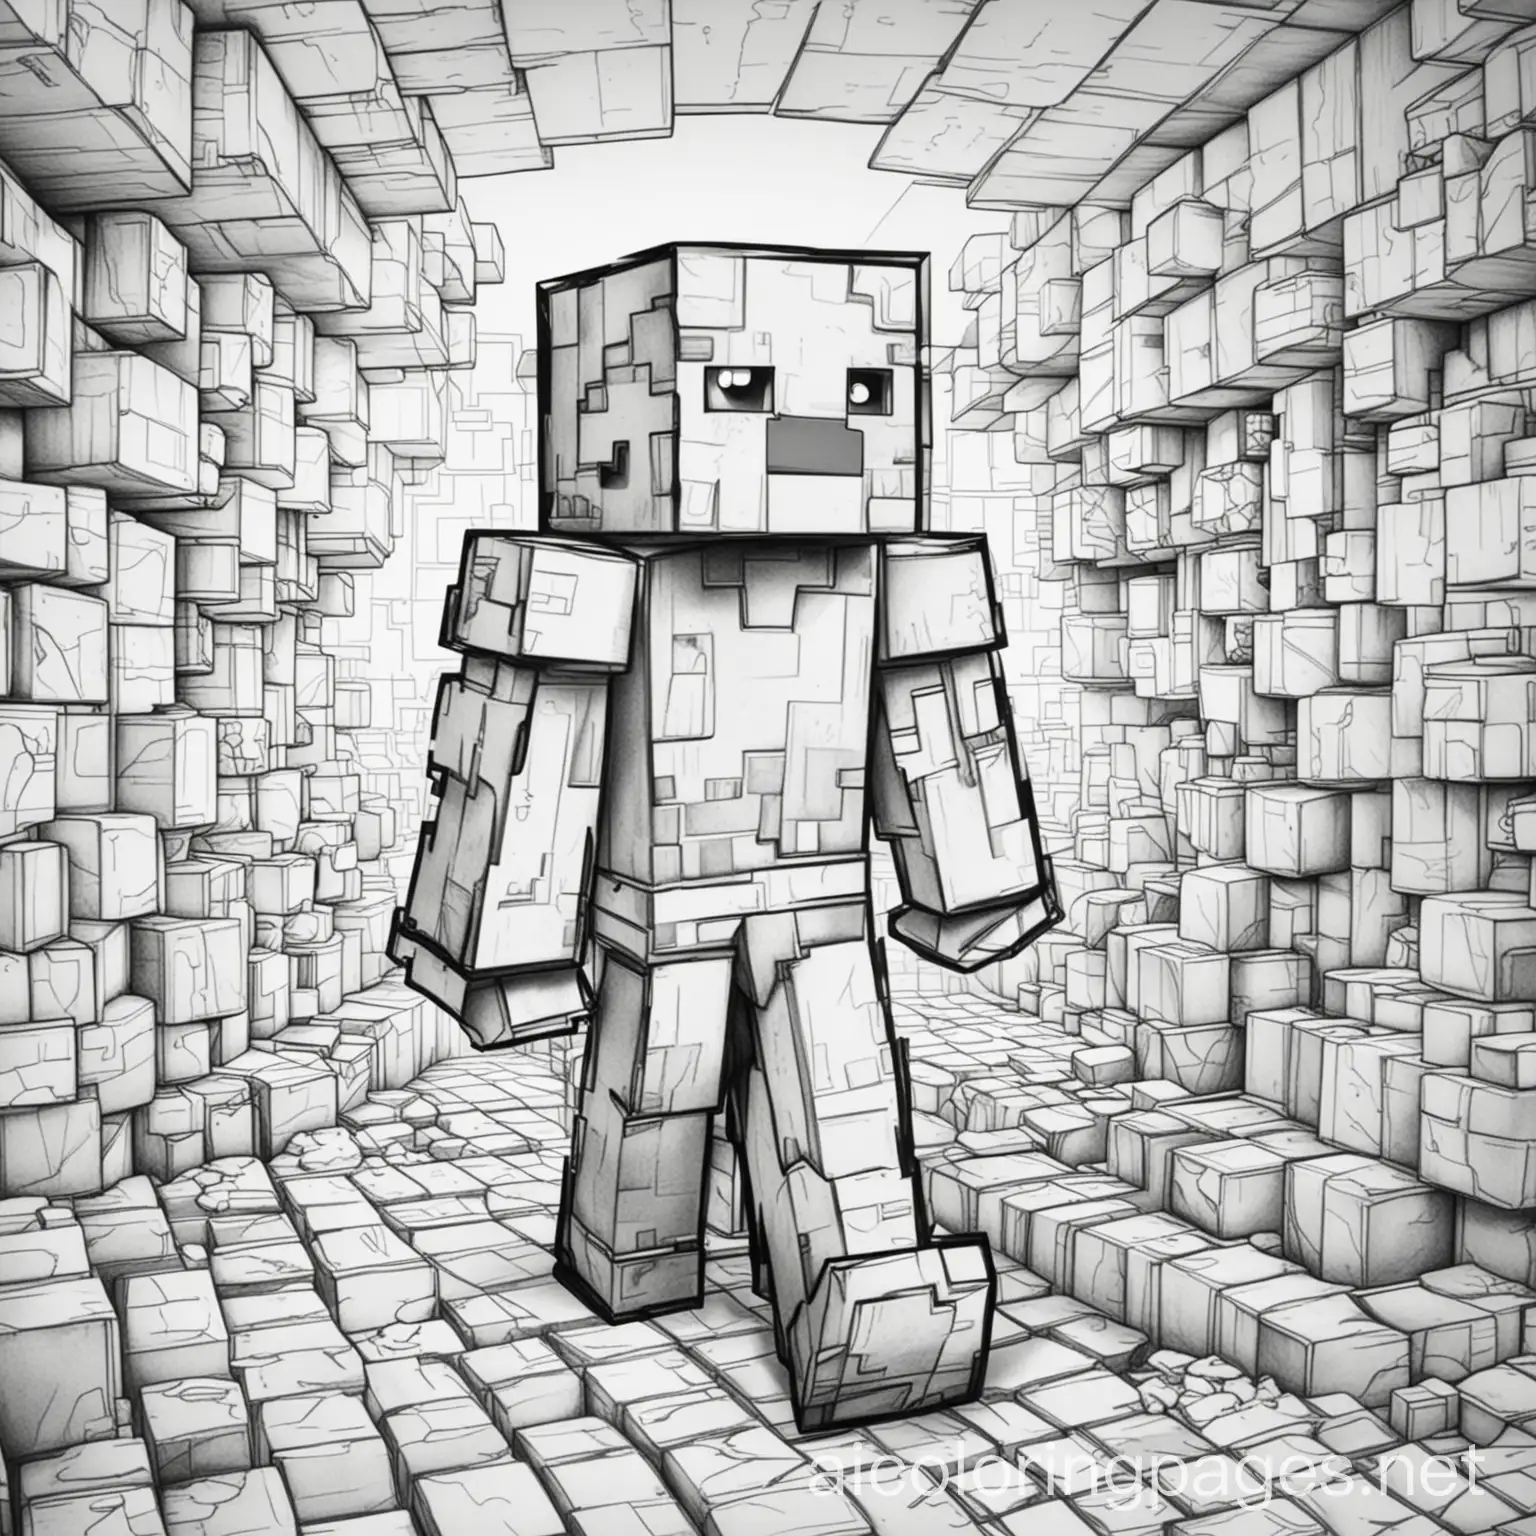 Minecraft, Coloring Page, black and white, line art, white background, Simplicity, Ample White Space. The background of the coloring page is plain white to make it easy for young children to color within the lines. The outlines of all the subjects are easy to distinguish, making it simple for kids to color without too much difficulty